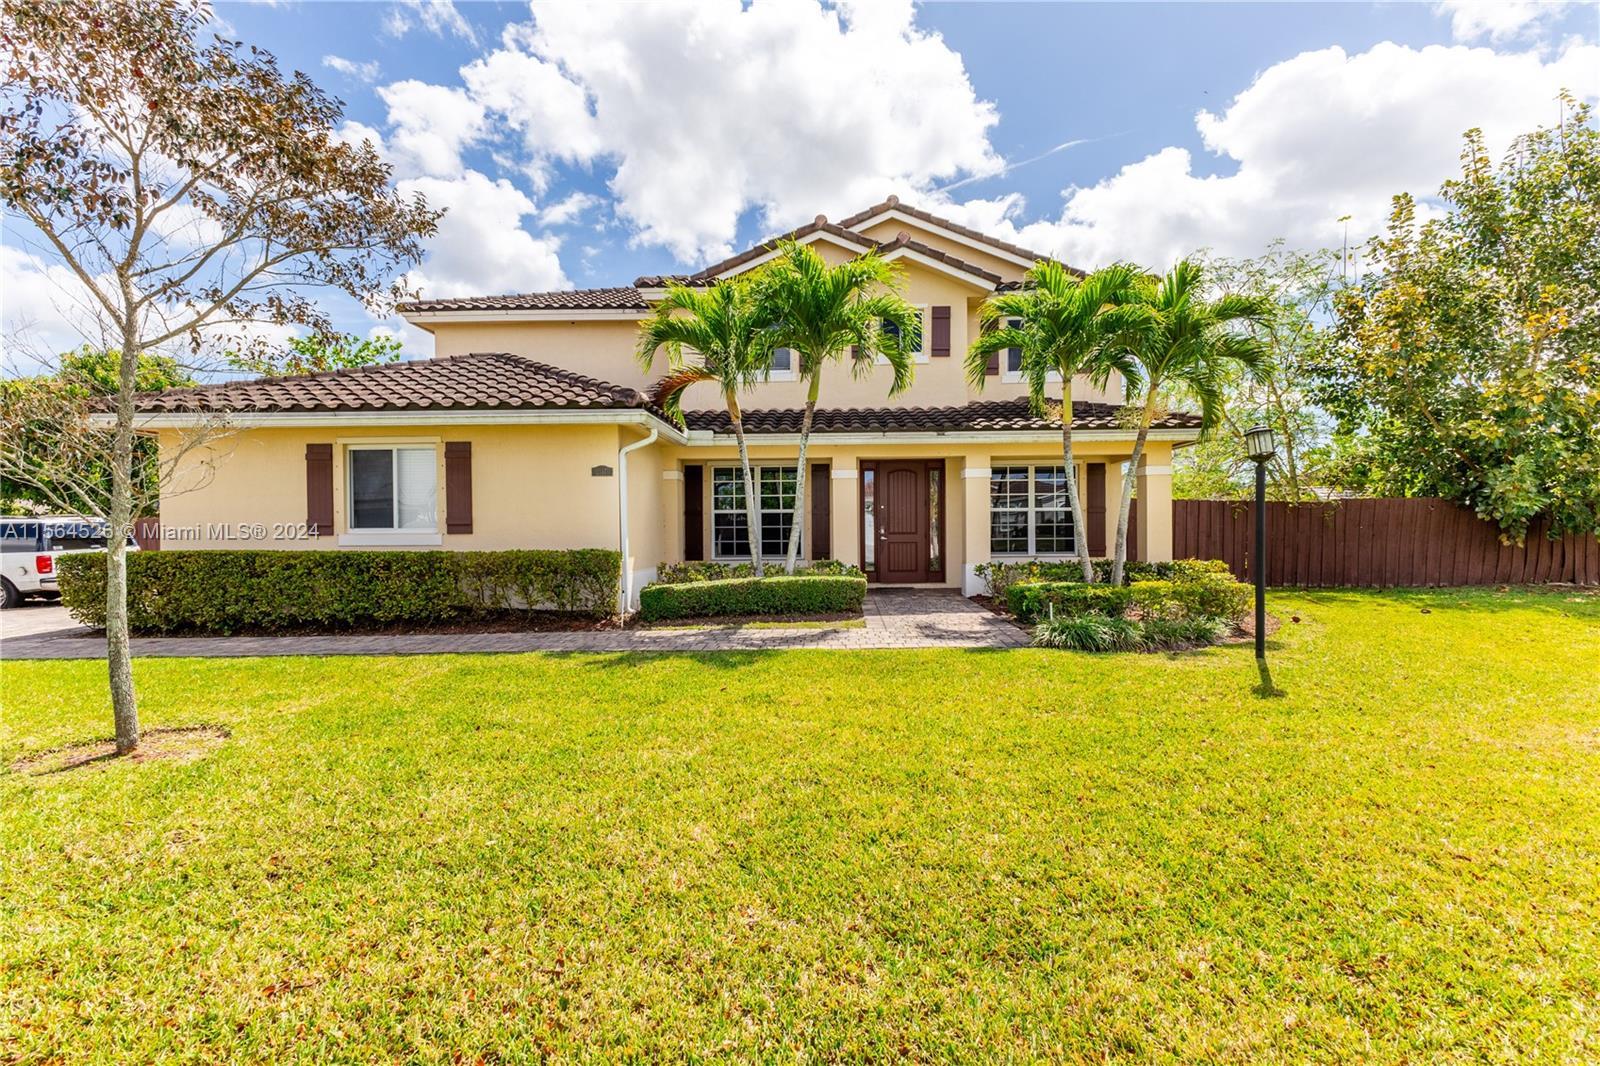 Photo of 2147 NW 15th Pl in Homestead, FL